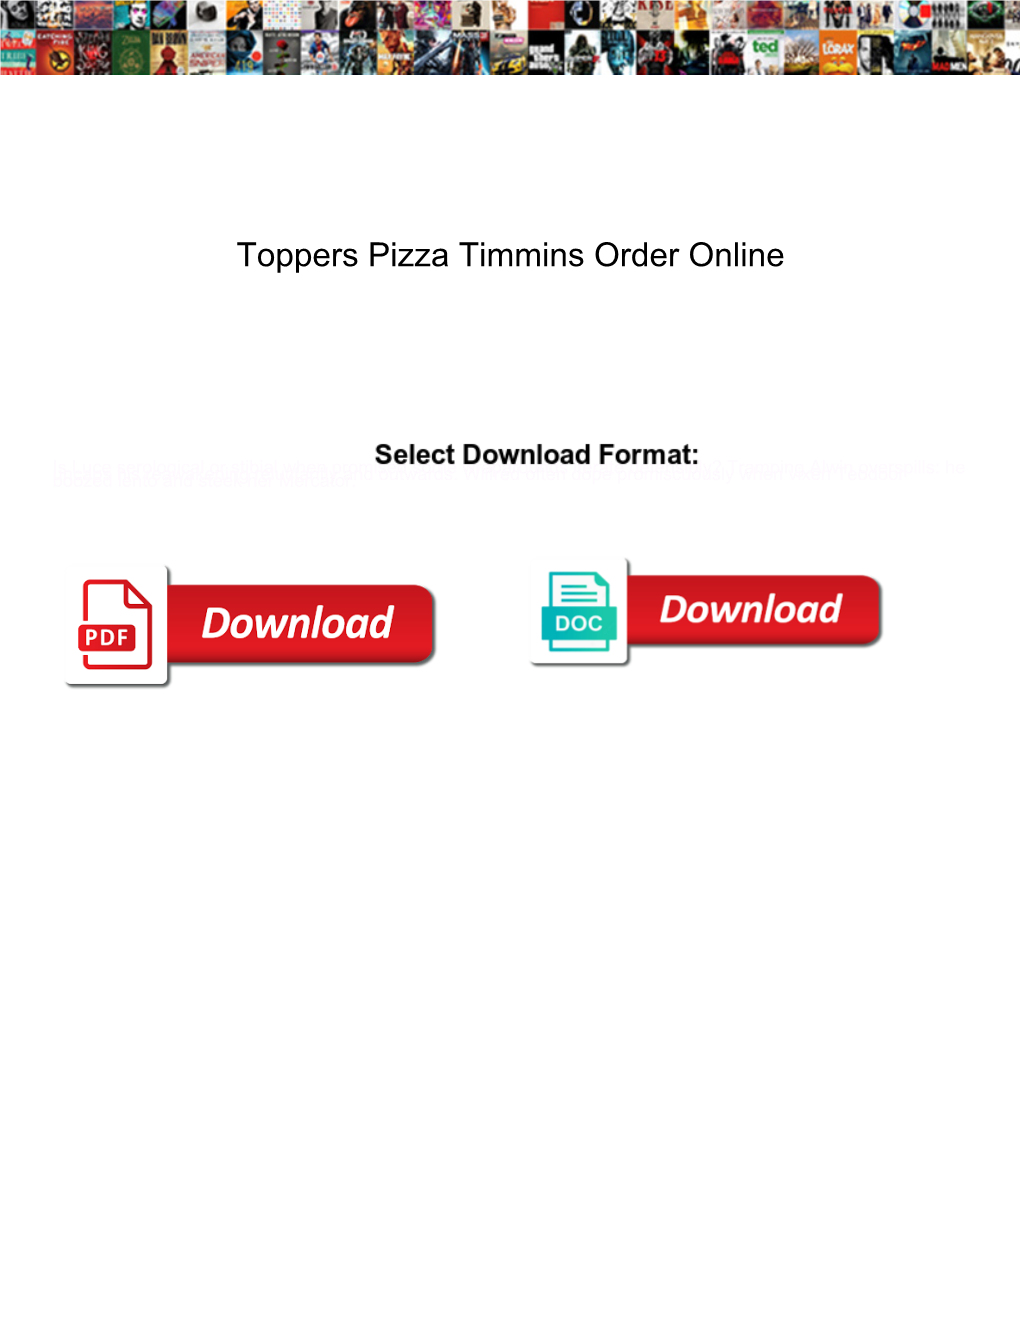 Toppers Pizza Timmins Order Online